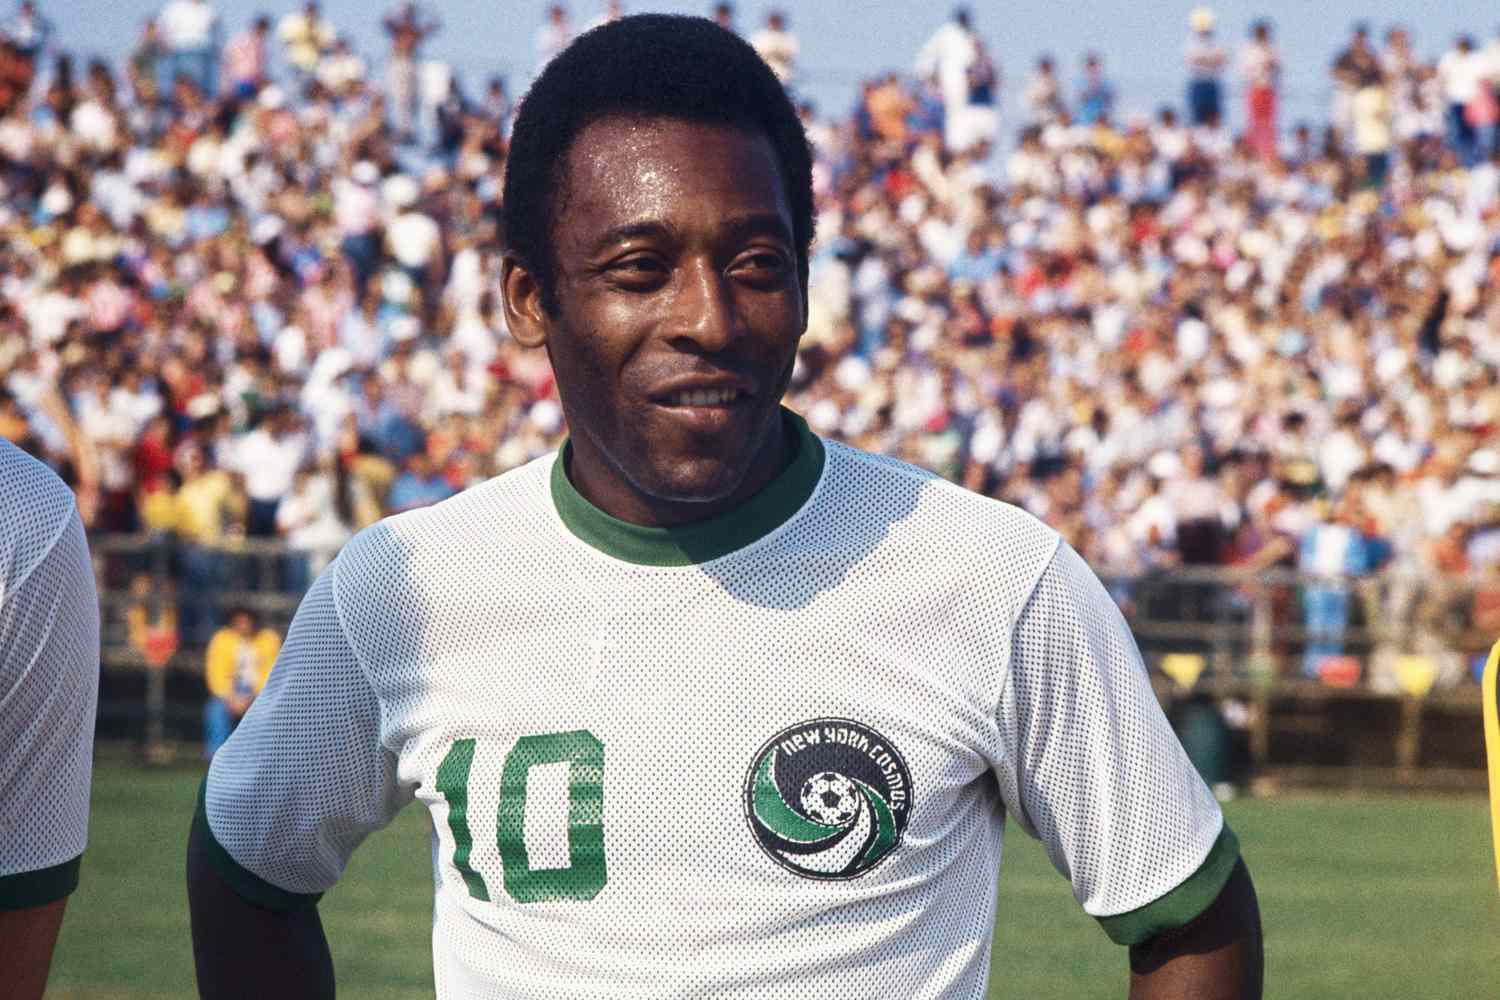 Soccer Legend Pelé Received A Payment Of $120,000 For The Simple Task Of Tying His Shoes During A Match